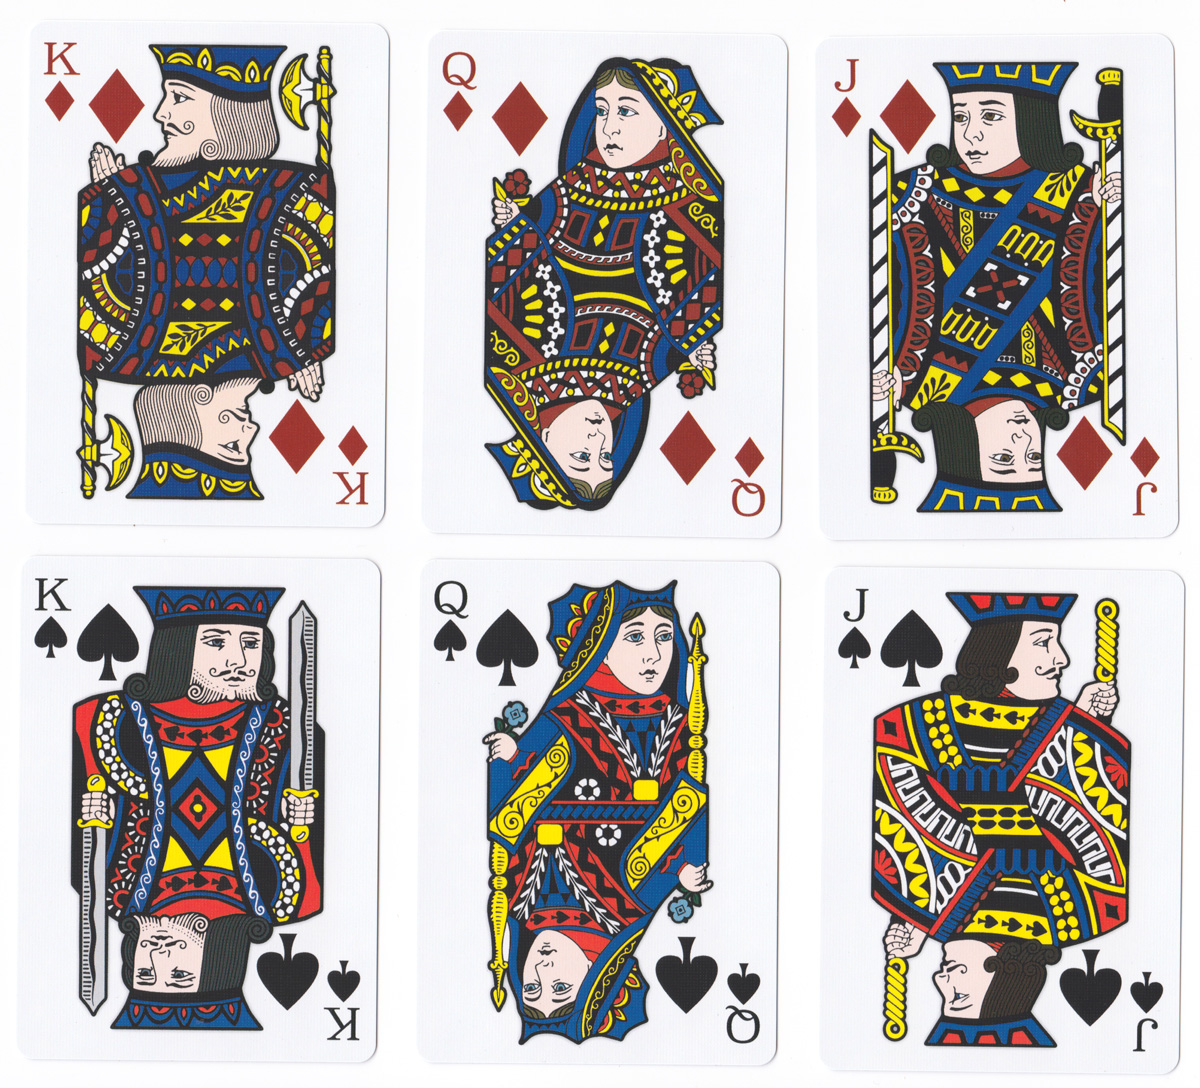 Interview with Playing Card Designer Paul Carpenter (Encarded Playing –